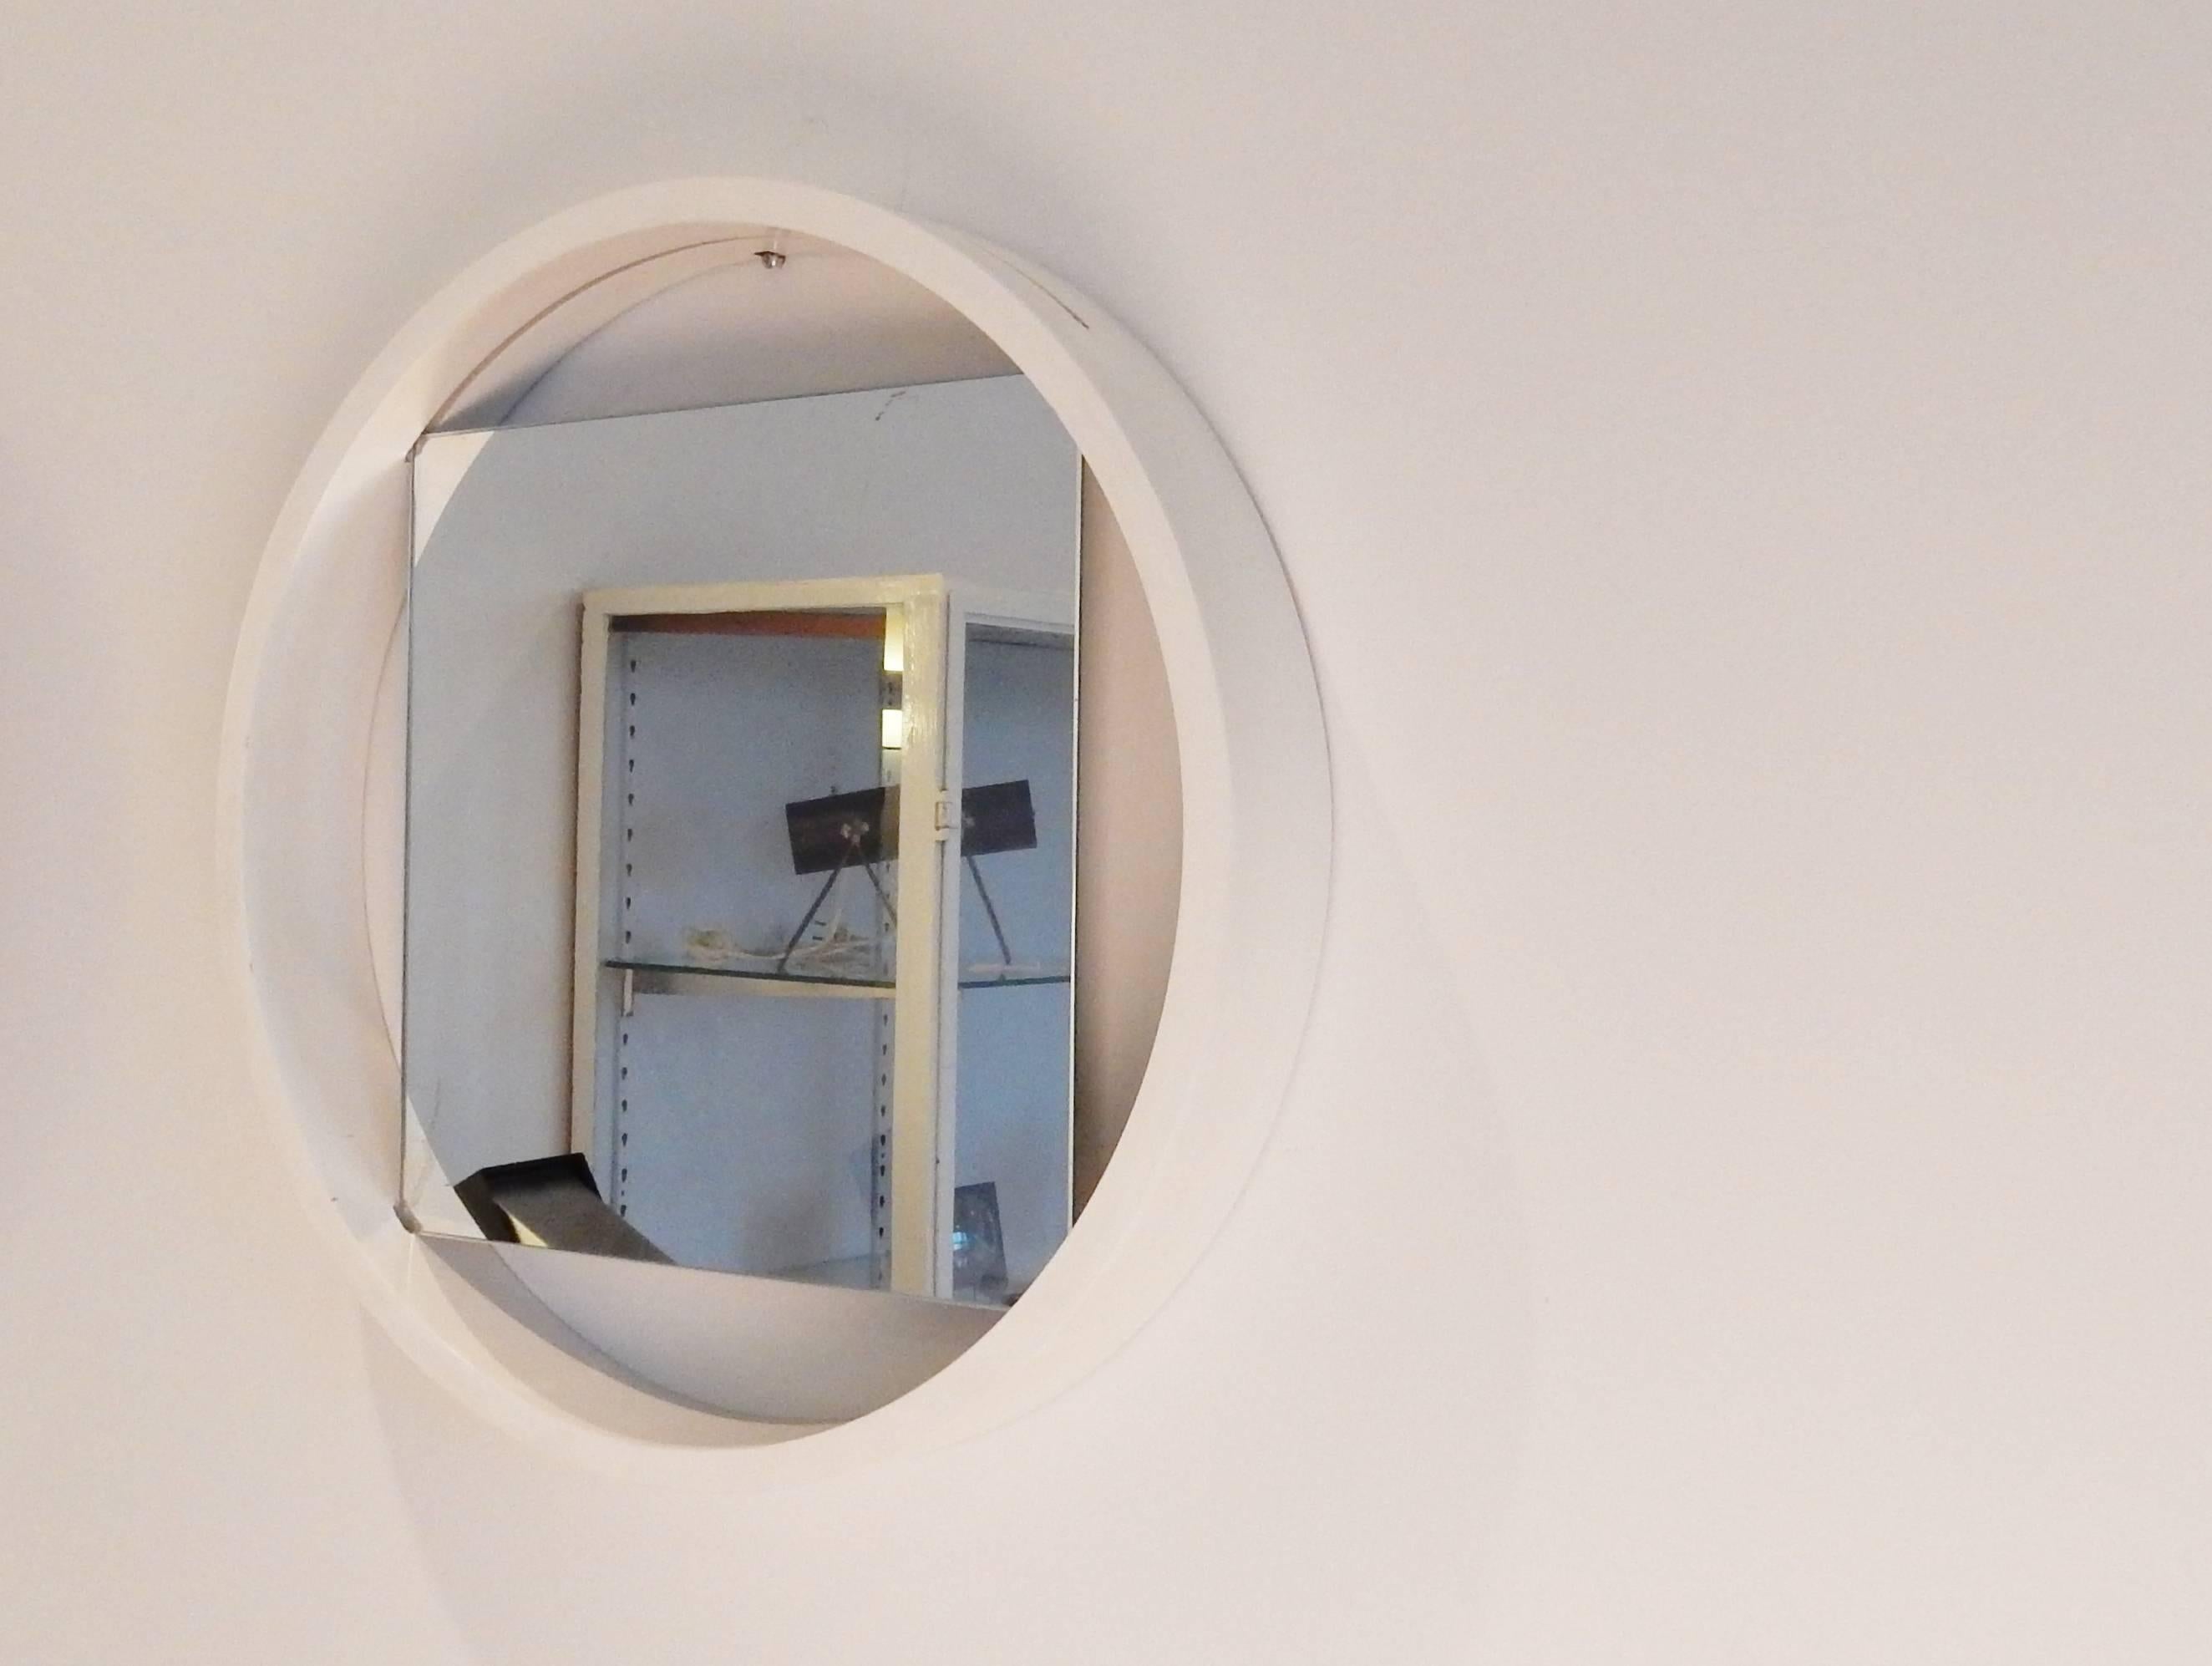 Dutch Iconic 1950s Black and White Modernist Mirror by Benno Premsela for 't Spectrum